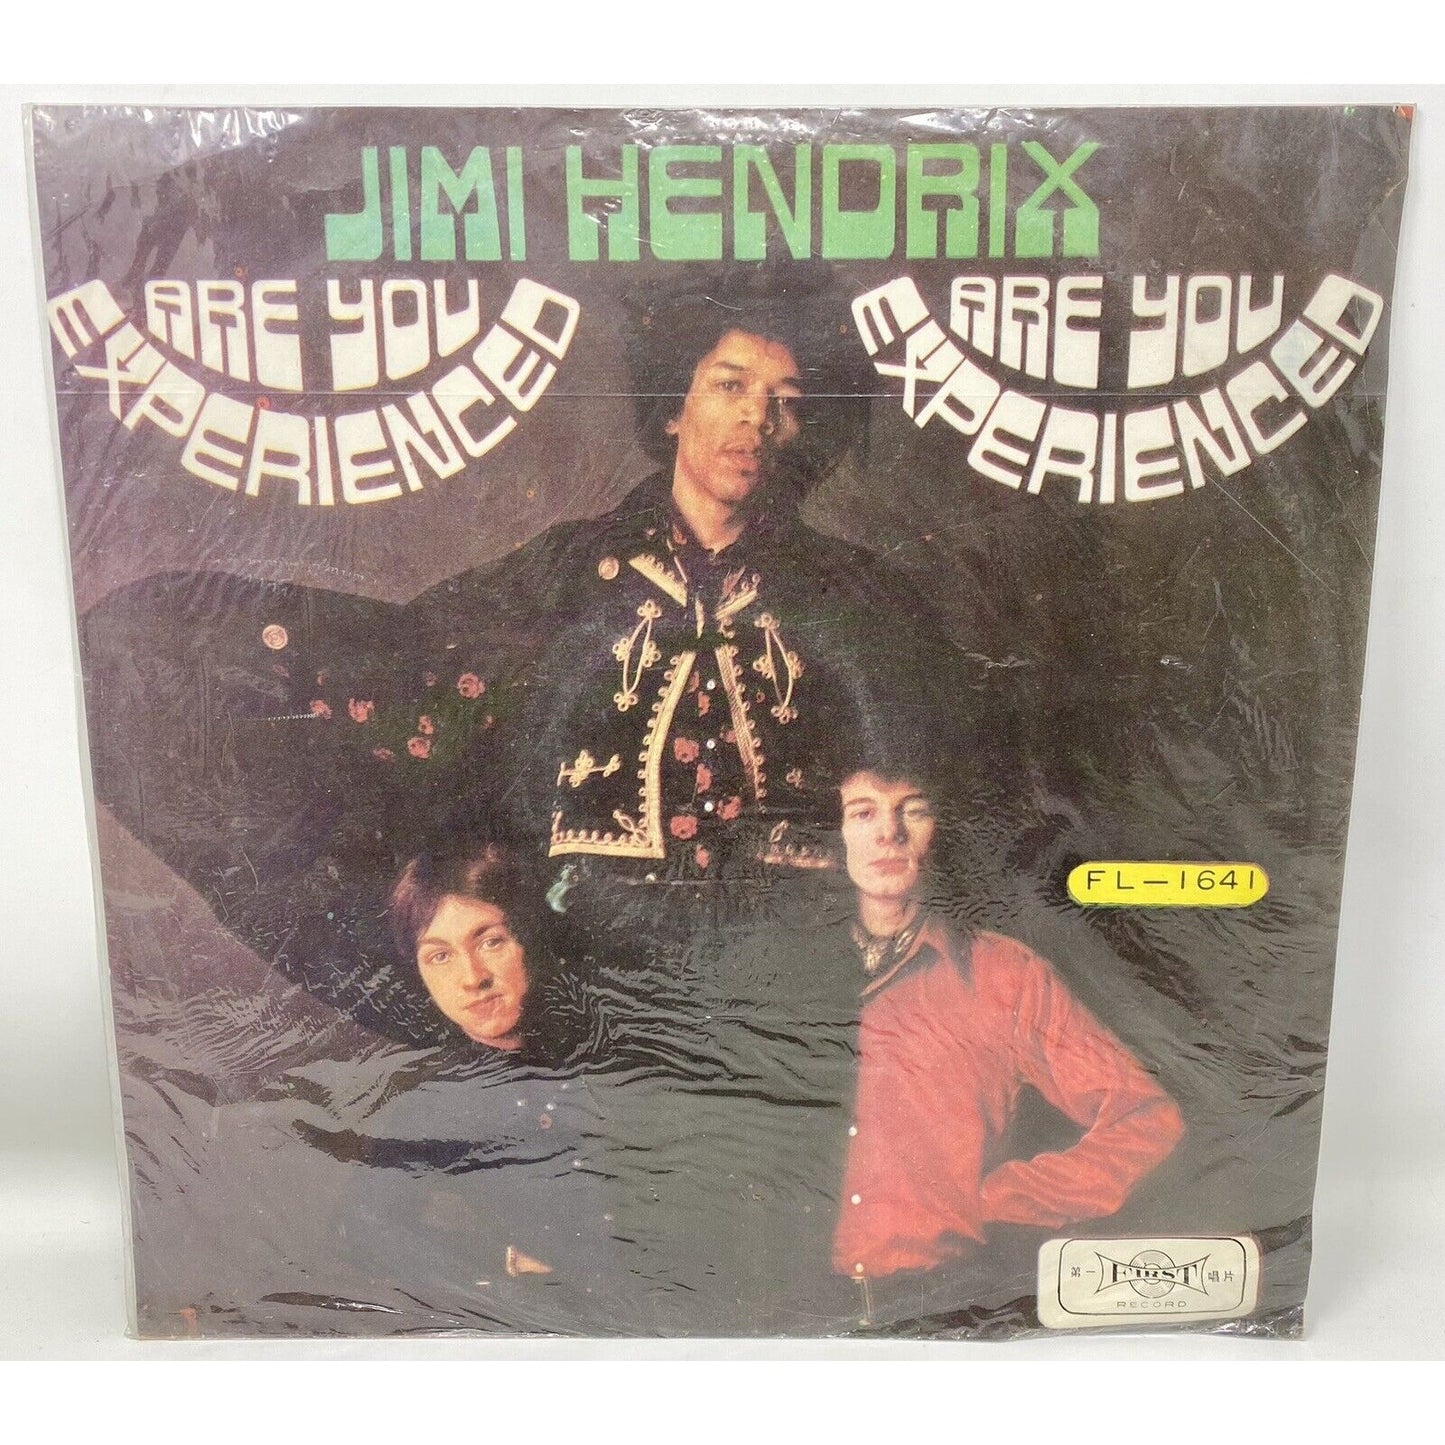 The Jimi Hendrix Experience Are You Experienced Taiwan First Record Vinyl 12" LP